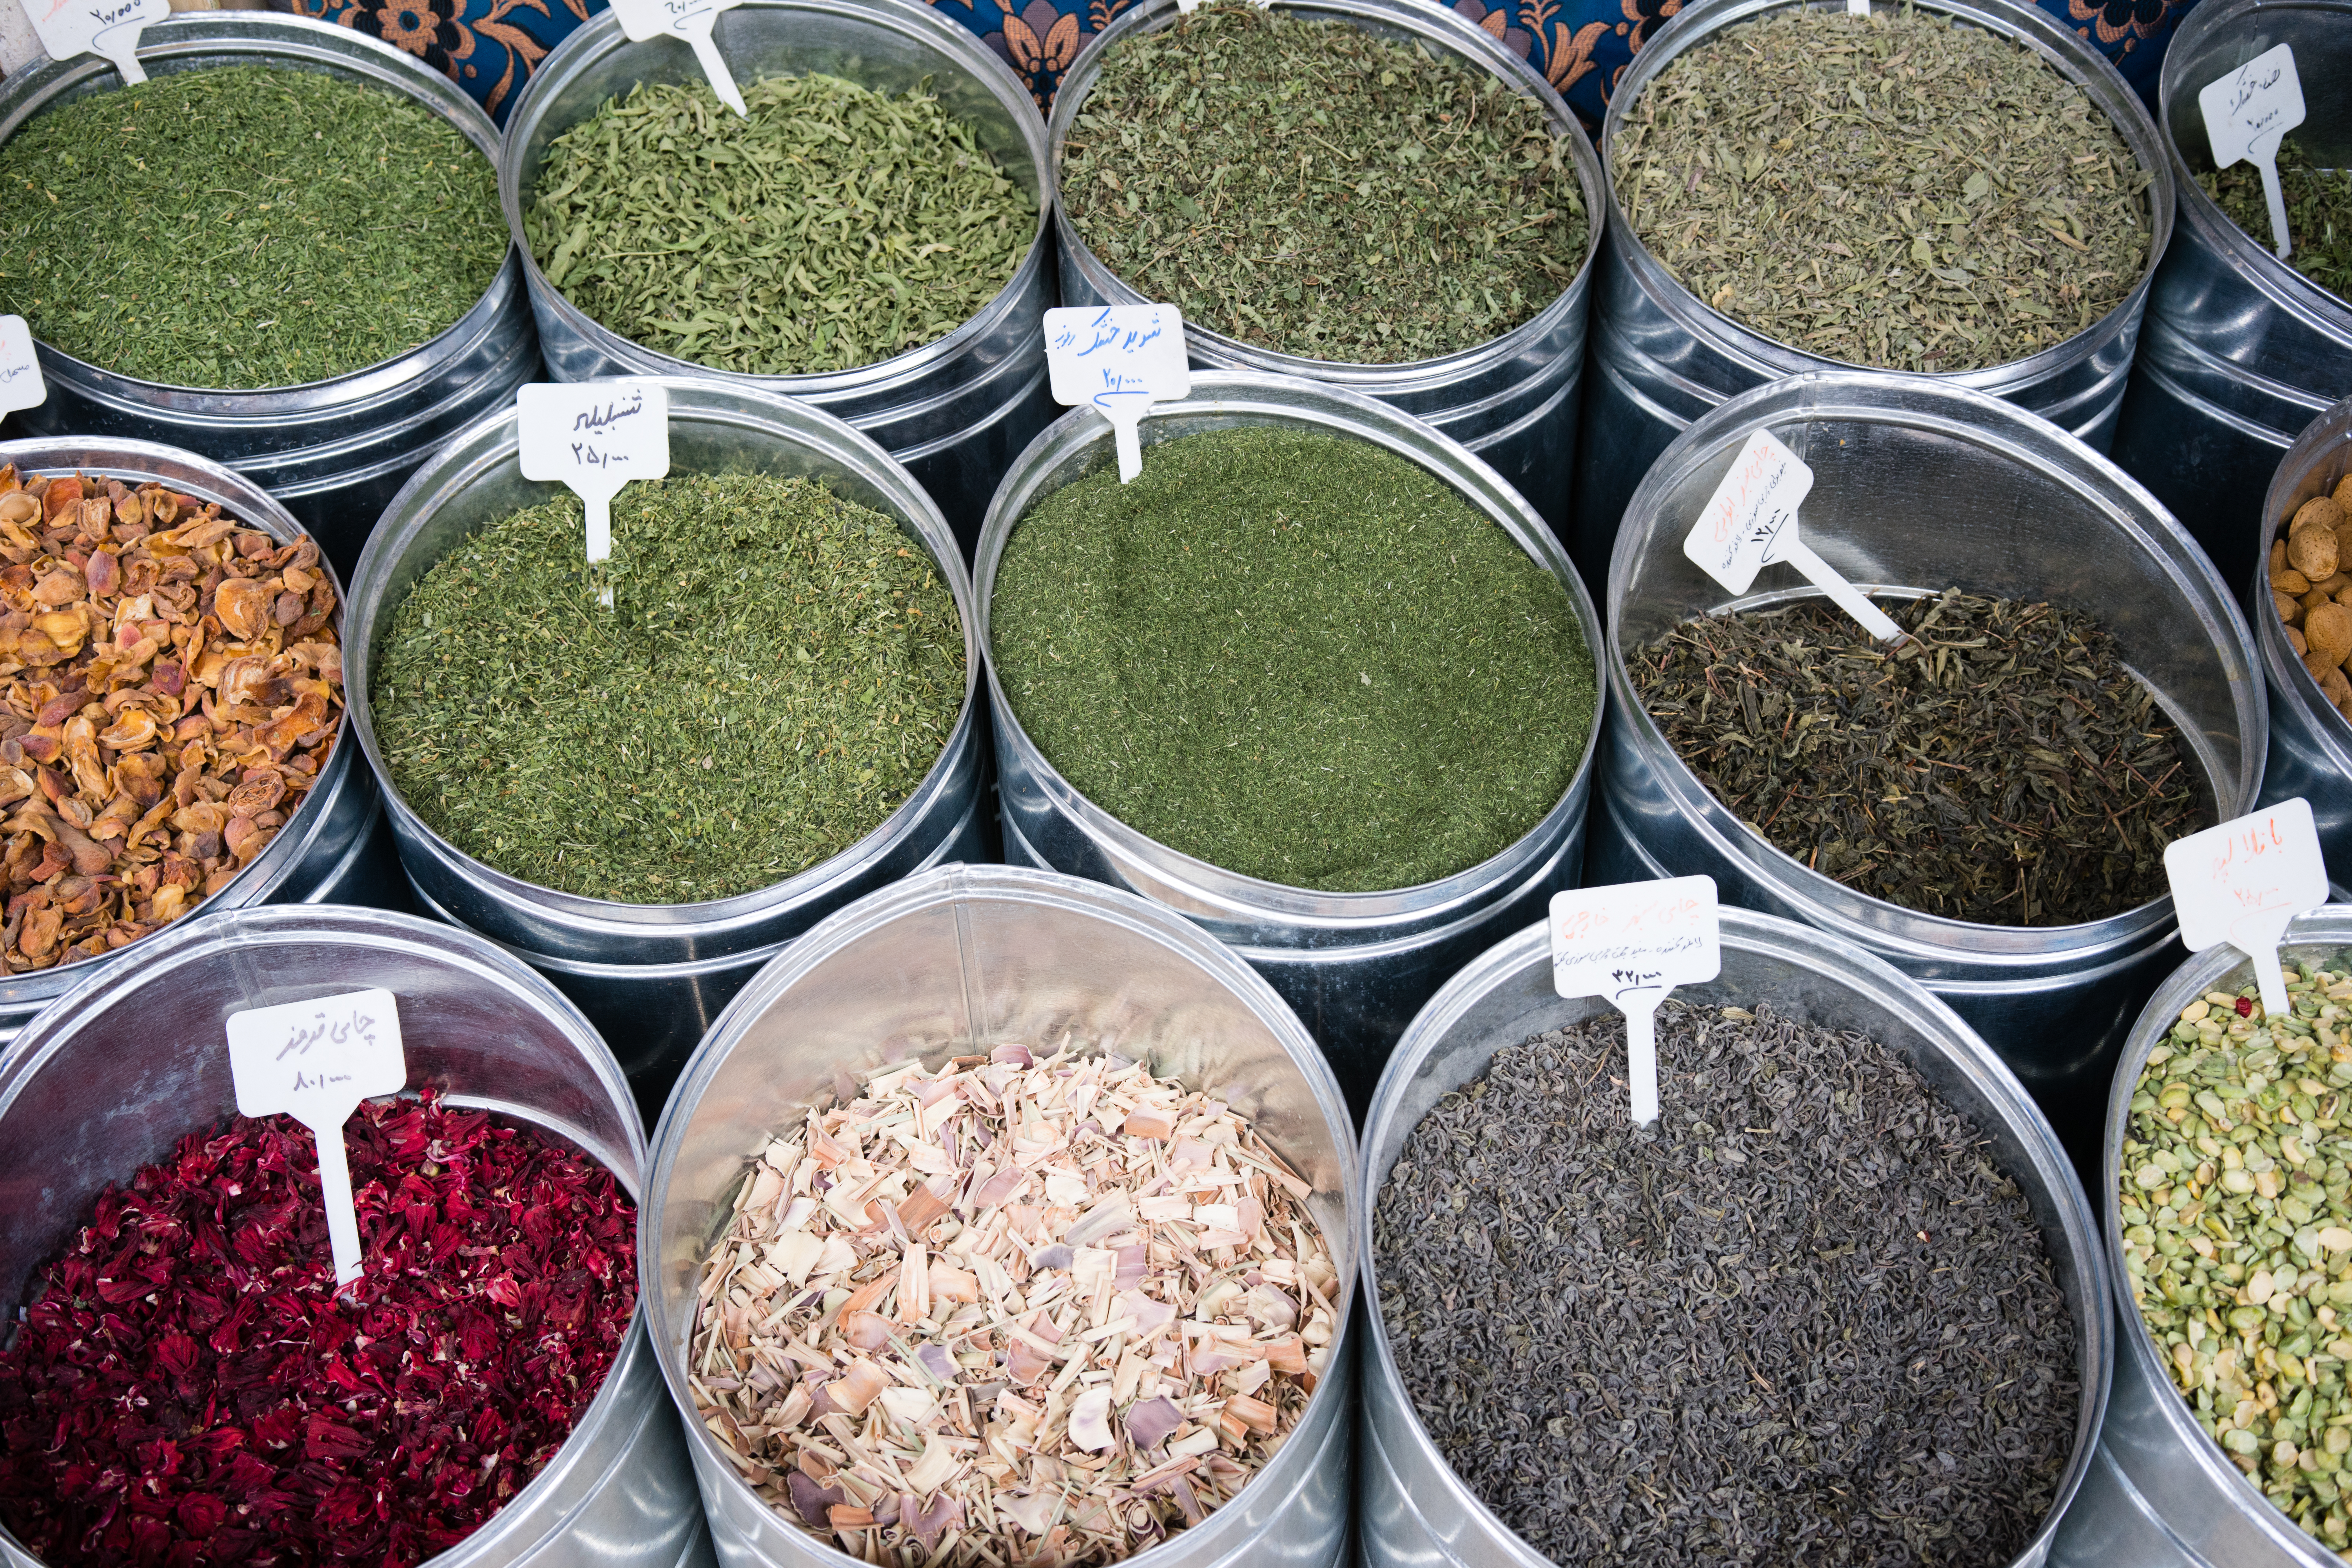 Shop selling herbs and teas. – © Minda photos / Shutterstock